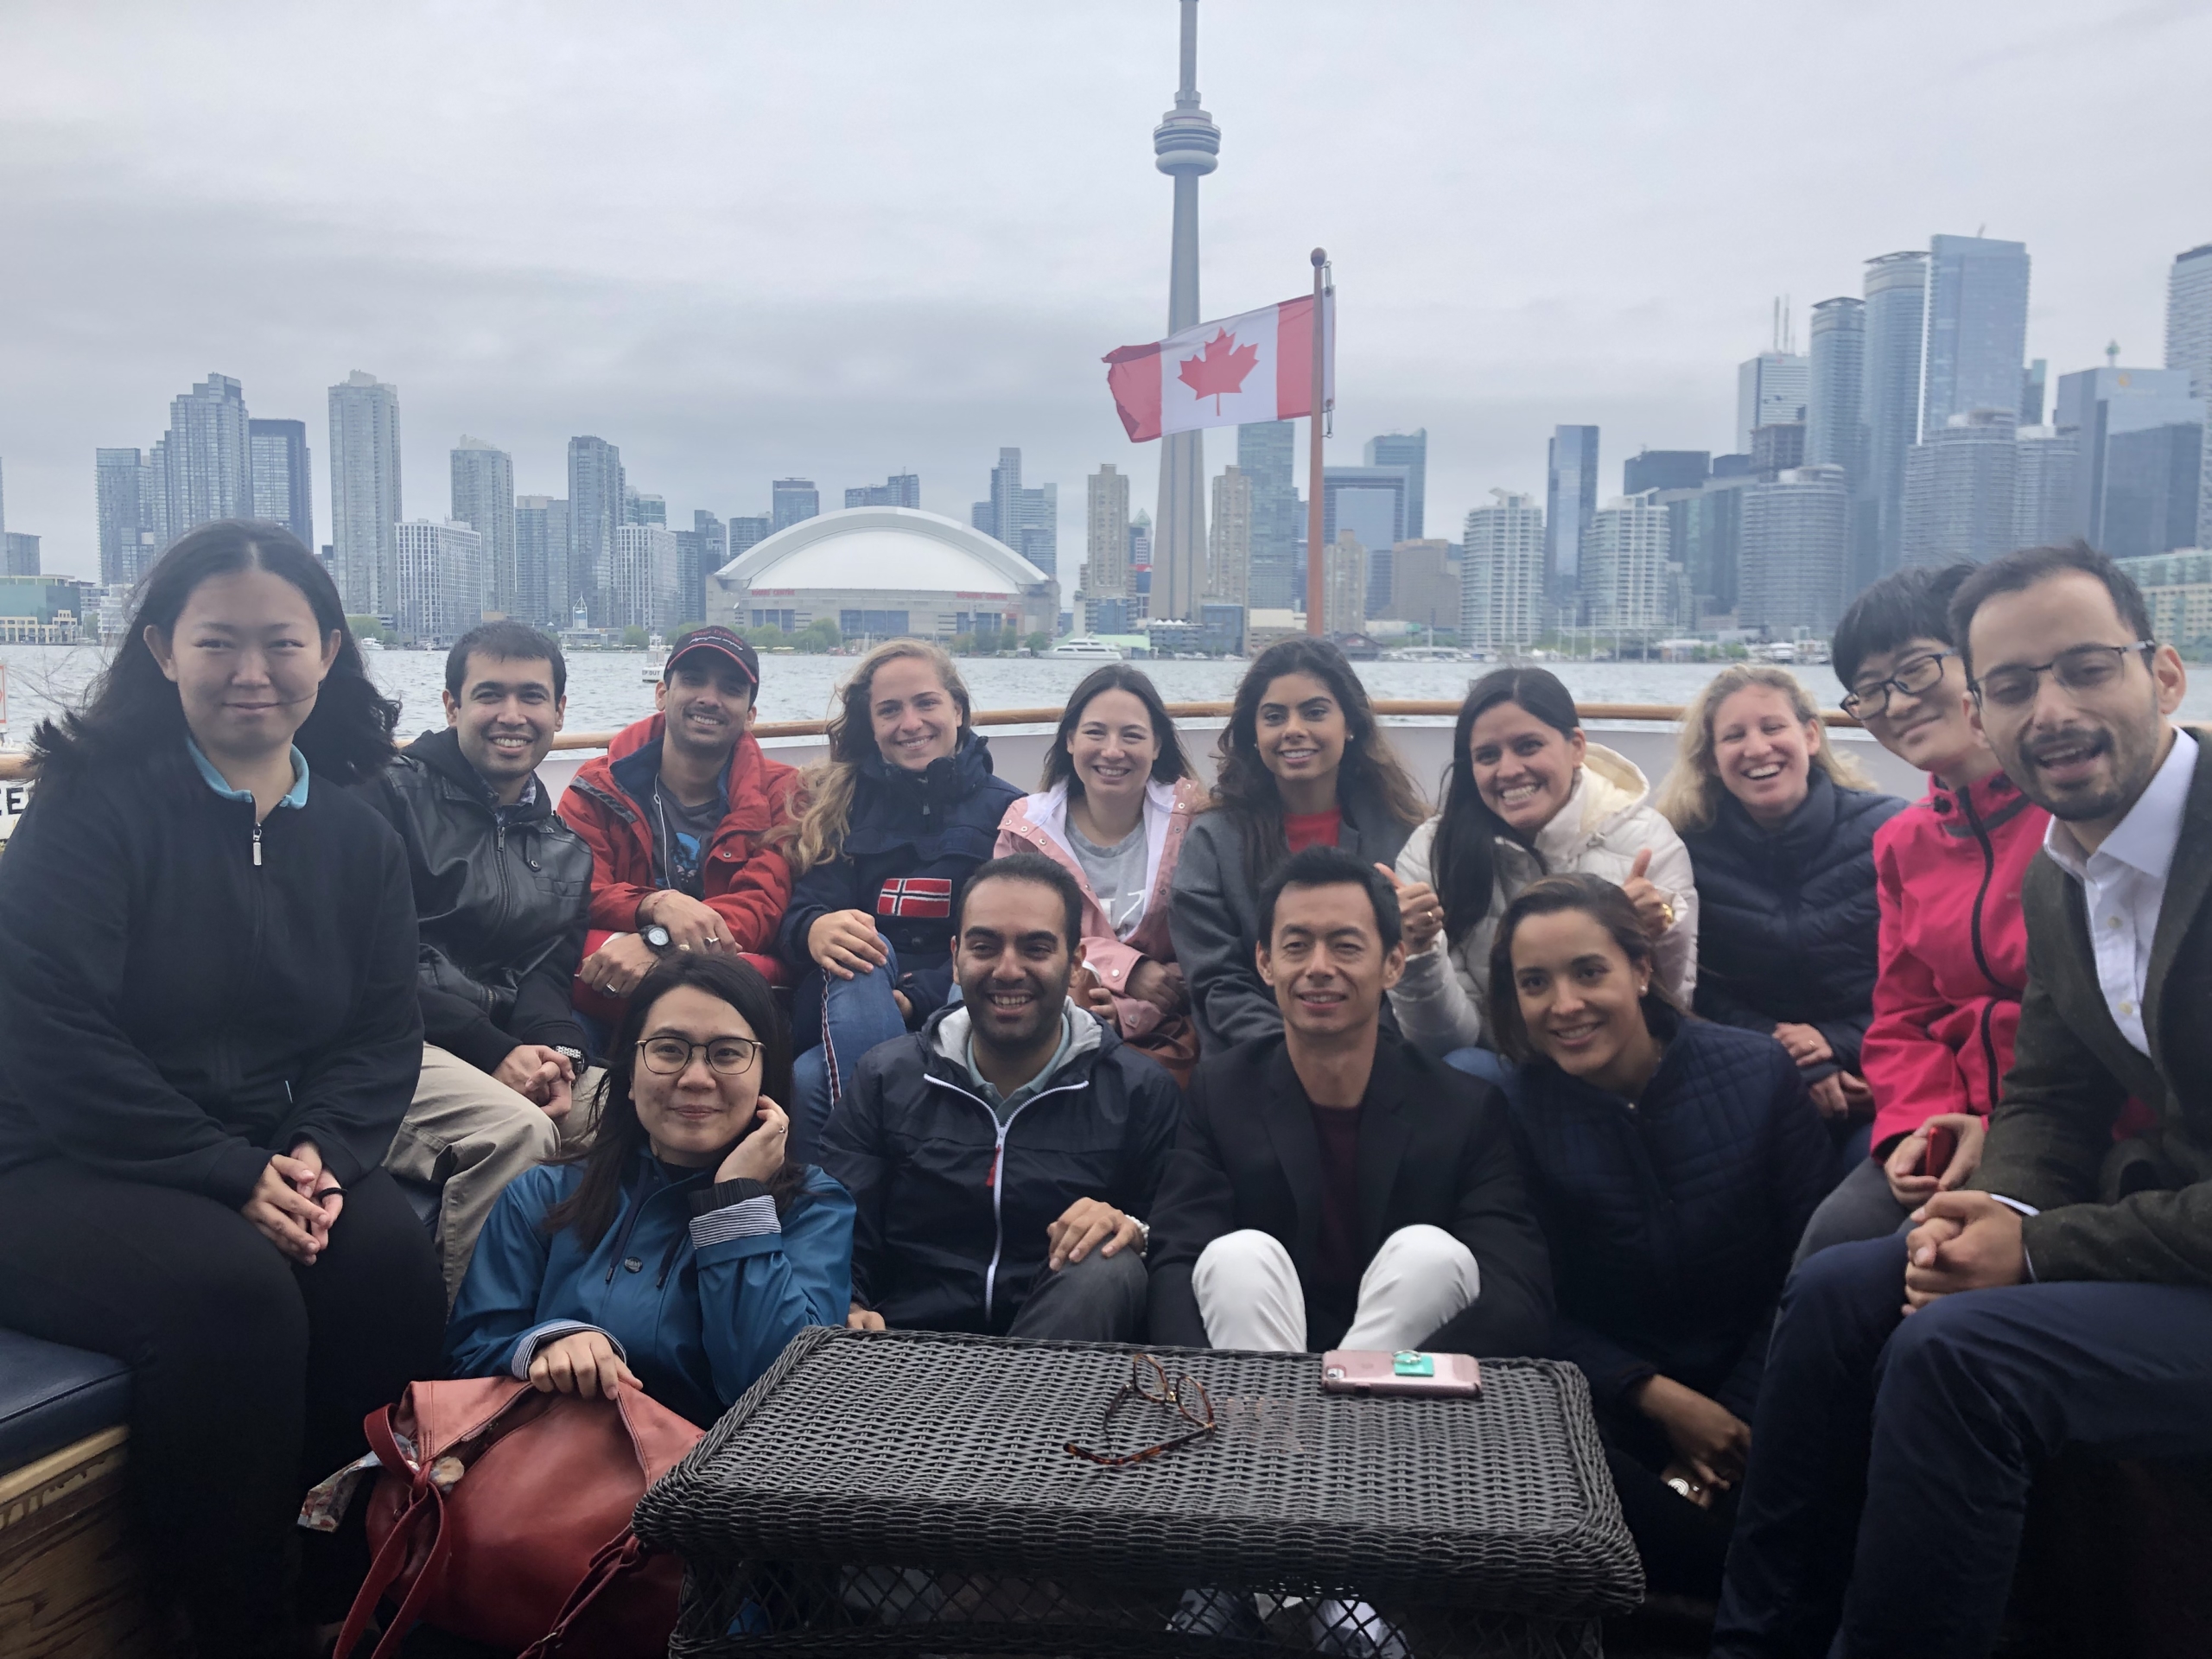 Group photo of students on a boat cruise in Toronto